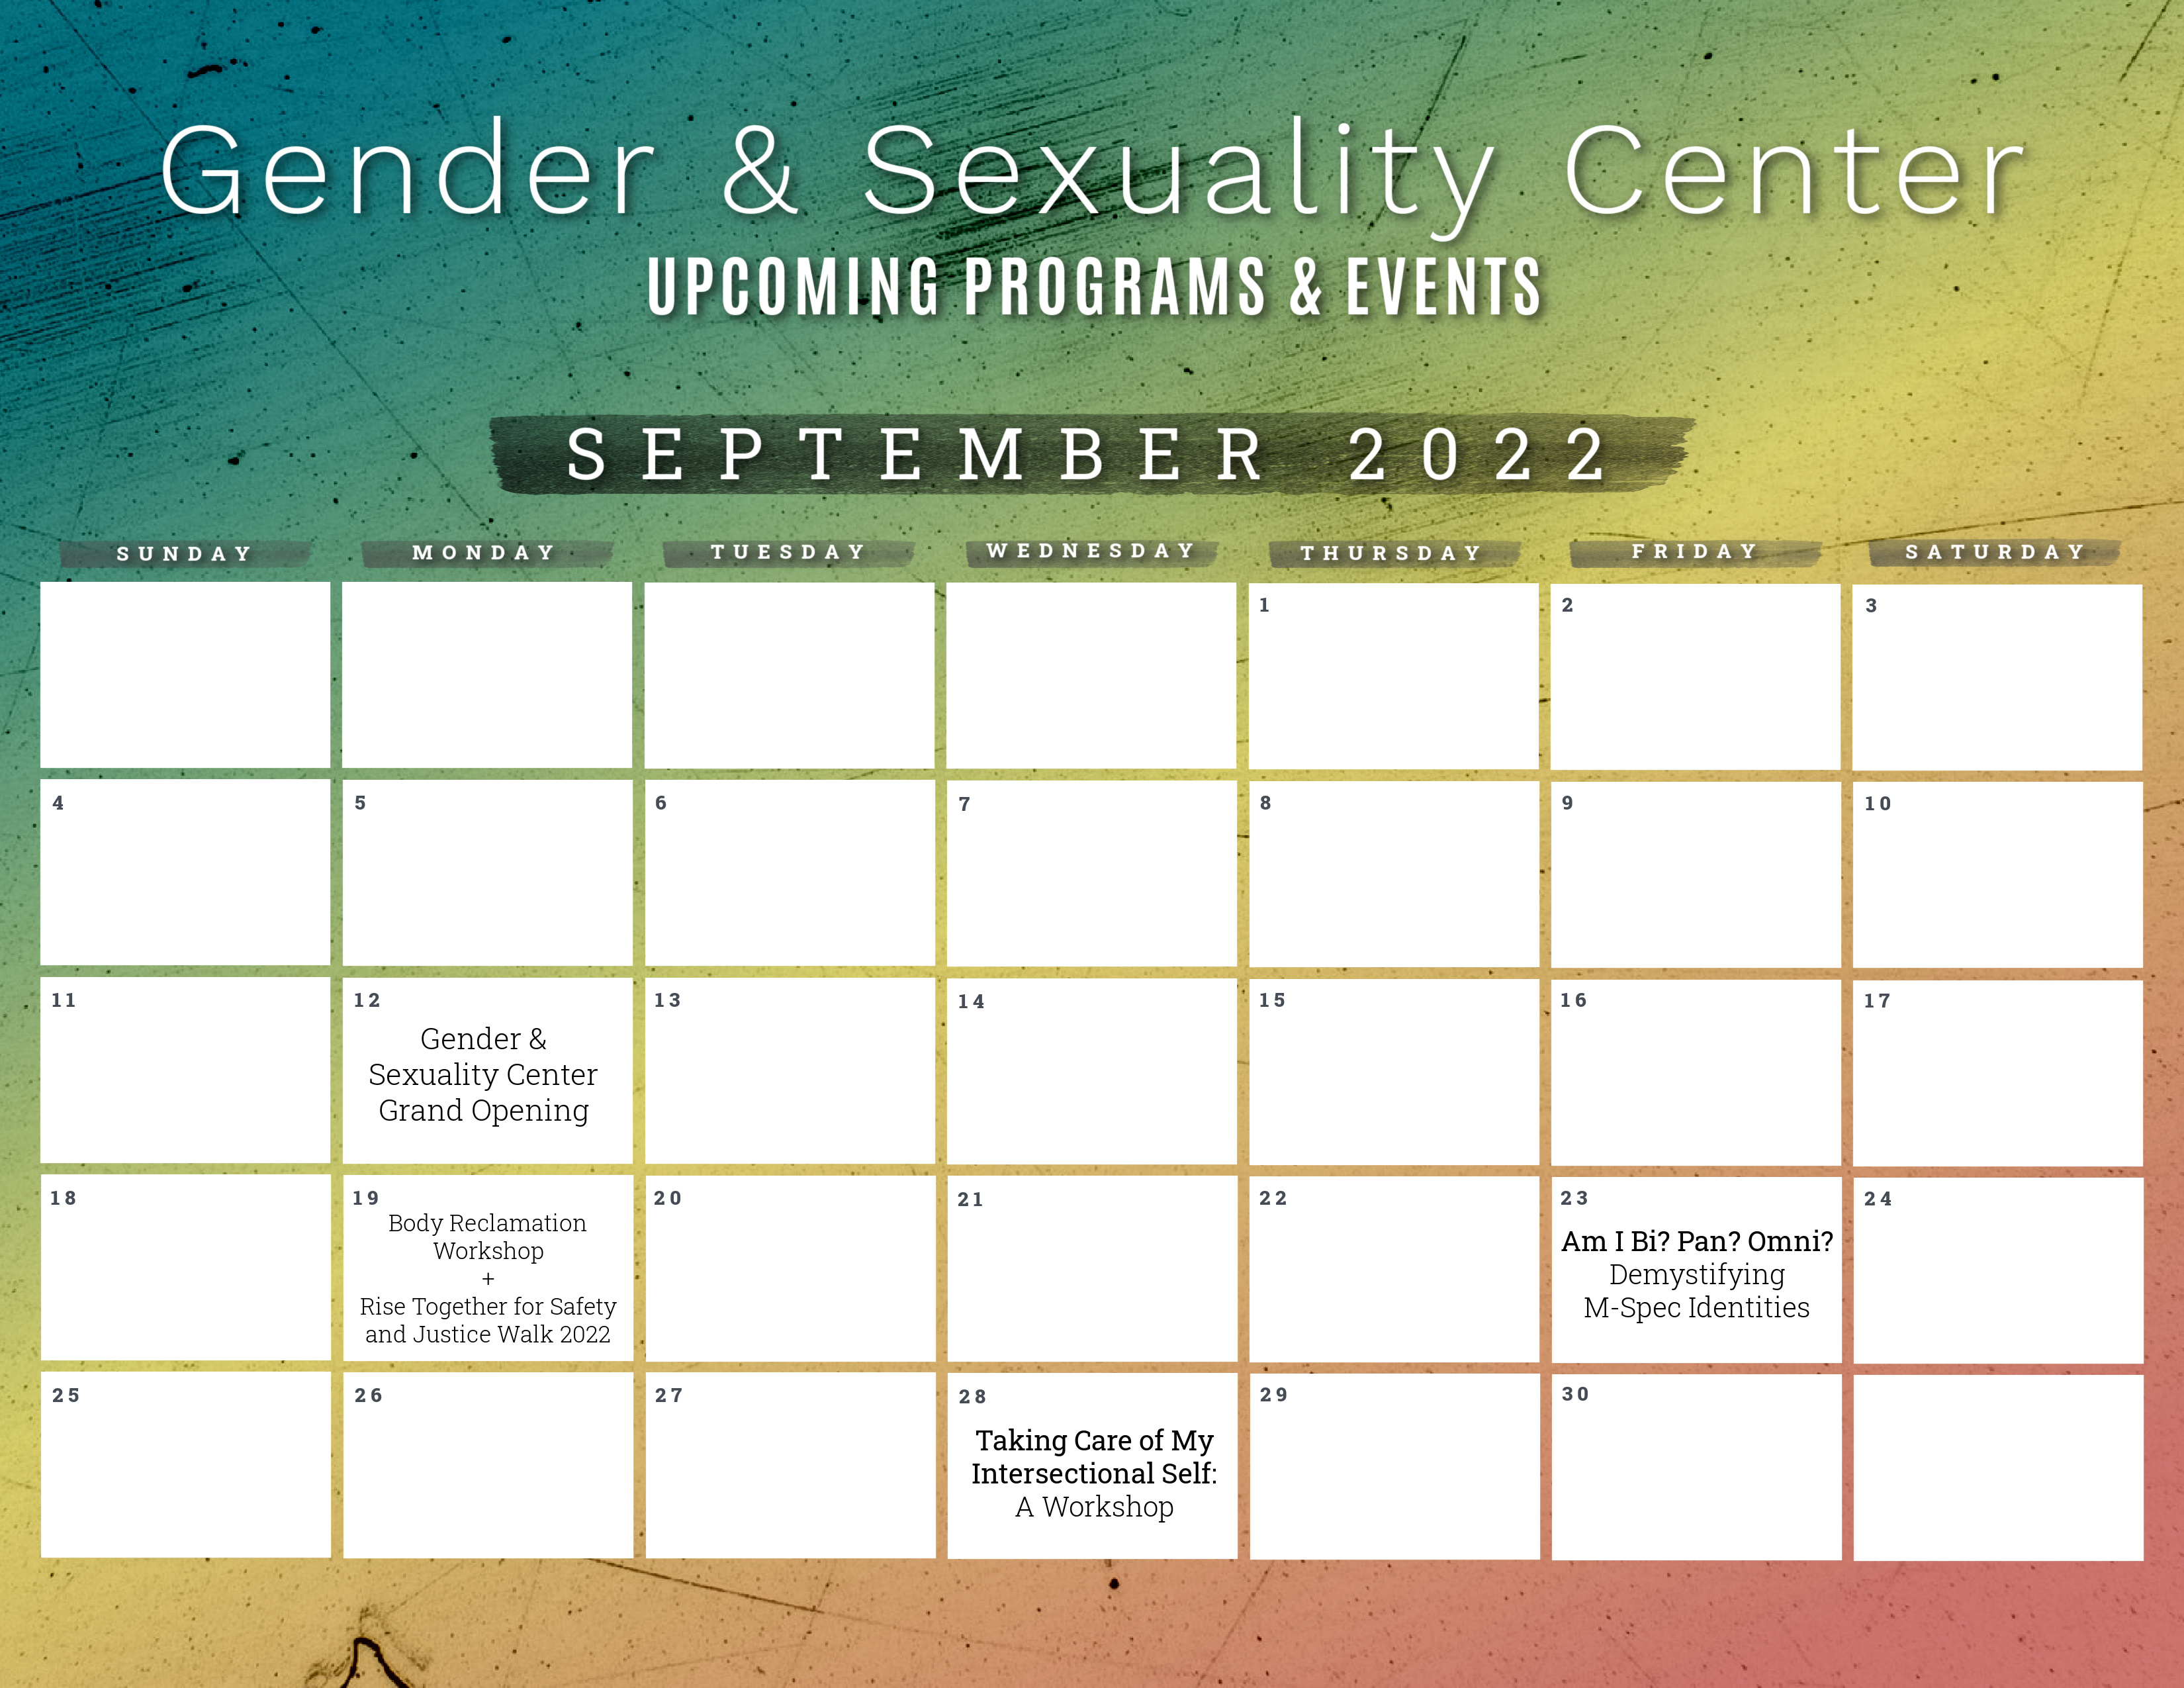 GSC Events Calendar September 2022: 9/12 Gender & Sexuality Center Grand Opening, 9/19 Body Reclamation Workshop, 9/23 Am I Bi? Pan? Omin? Demystifying M-Spec Identities, 9/28 Taking Care of My Intersectional Self: A Workshop